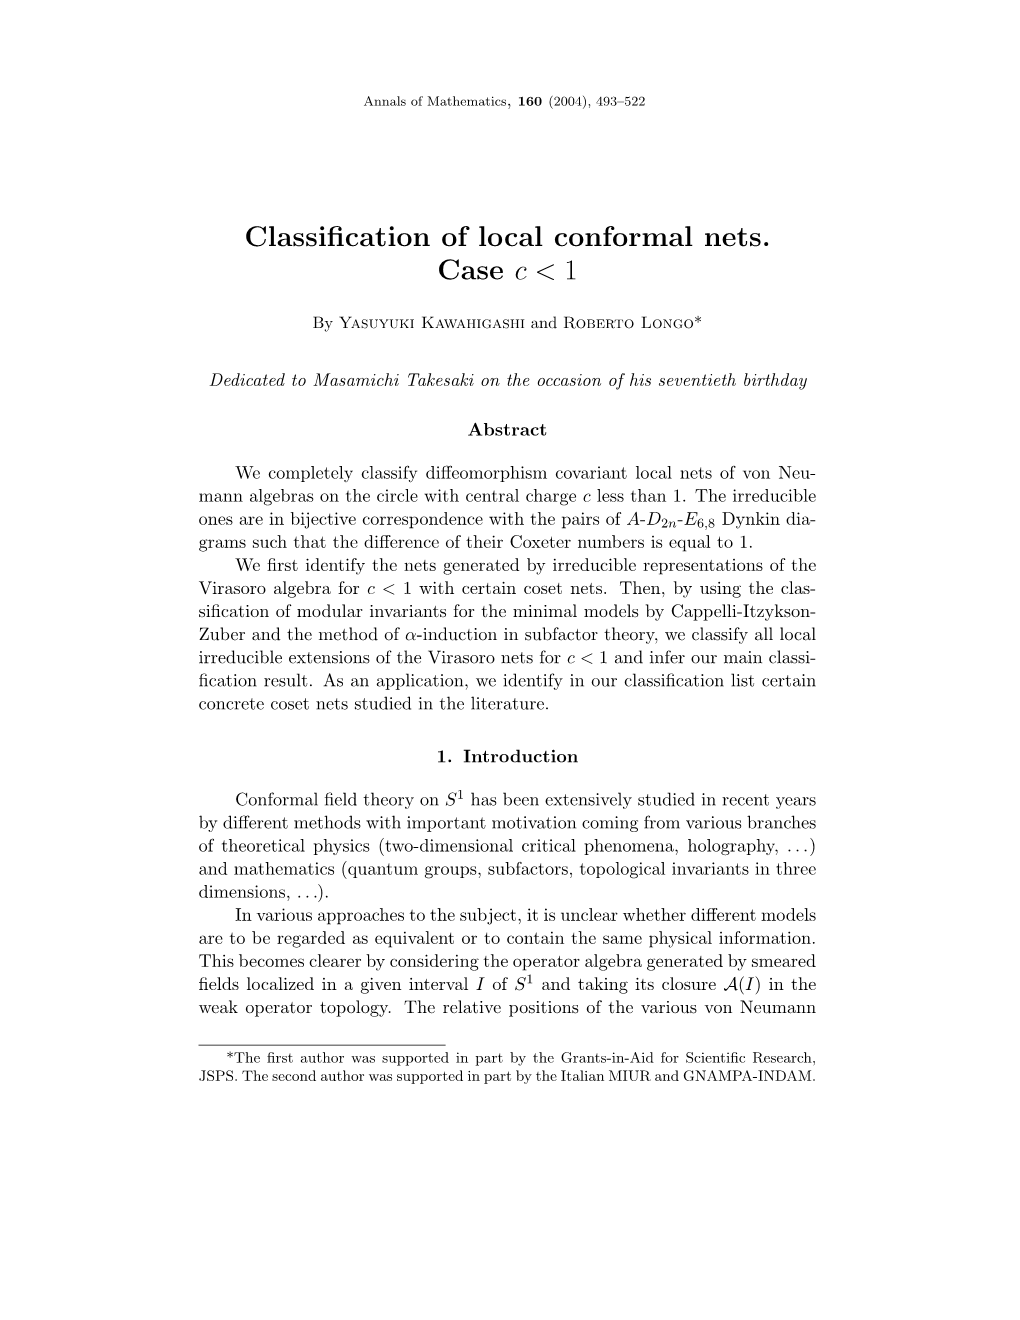 Classification of Local Conformal Nets. Case C &lt; 1